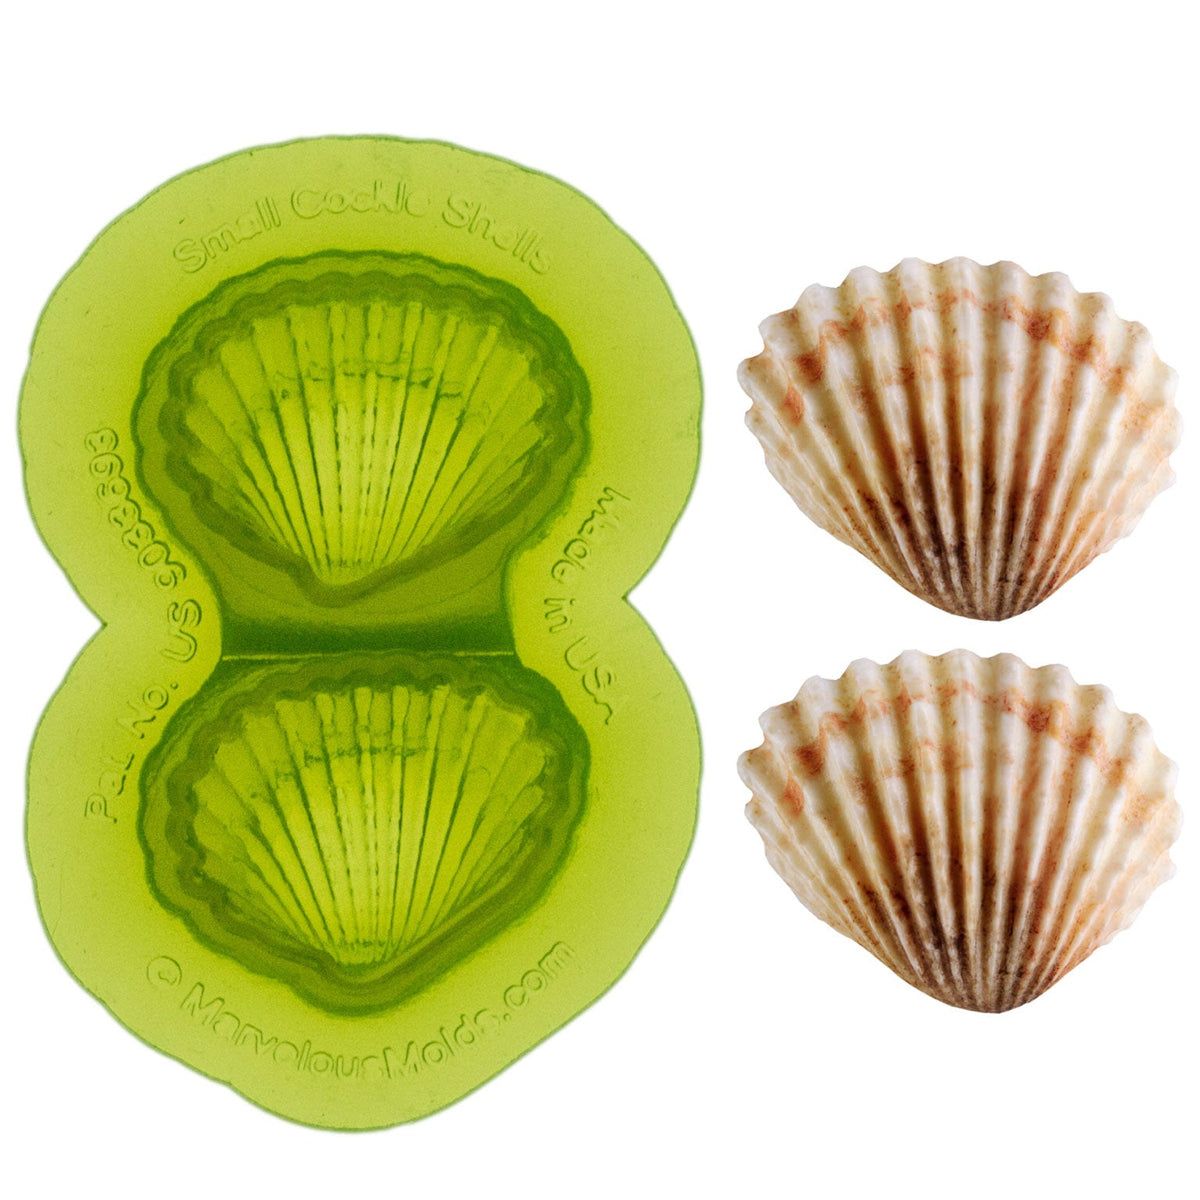 Small Cockle Shells Food Safe Silicone Mold for Fondant Cake Decorating by Marvelous Molds